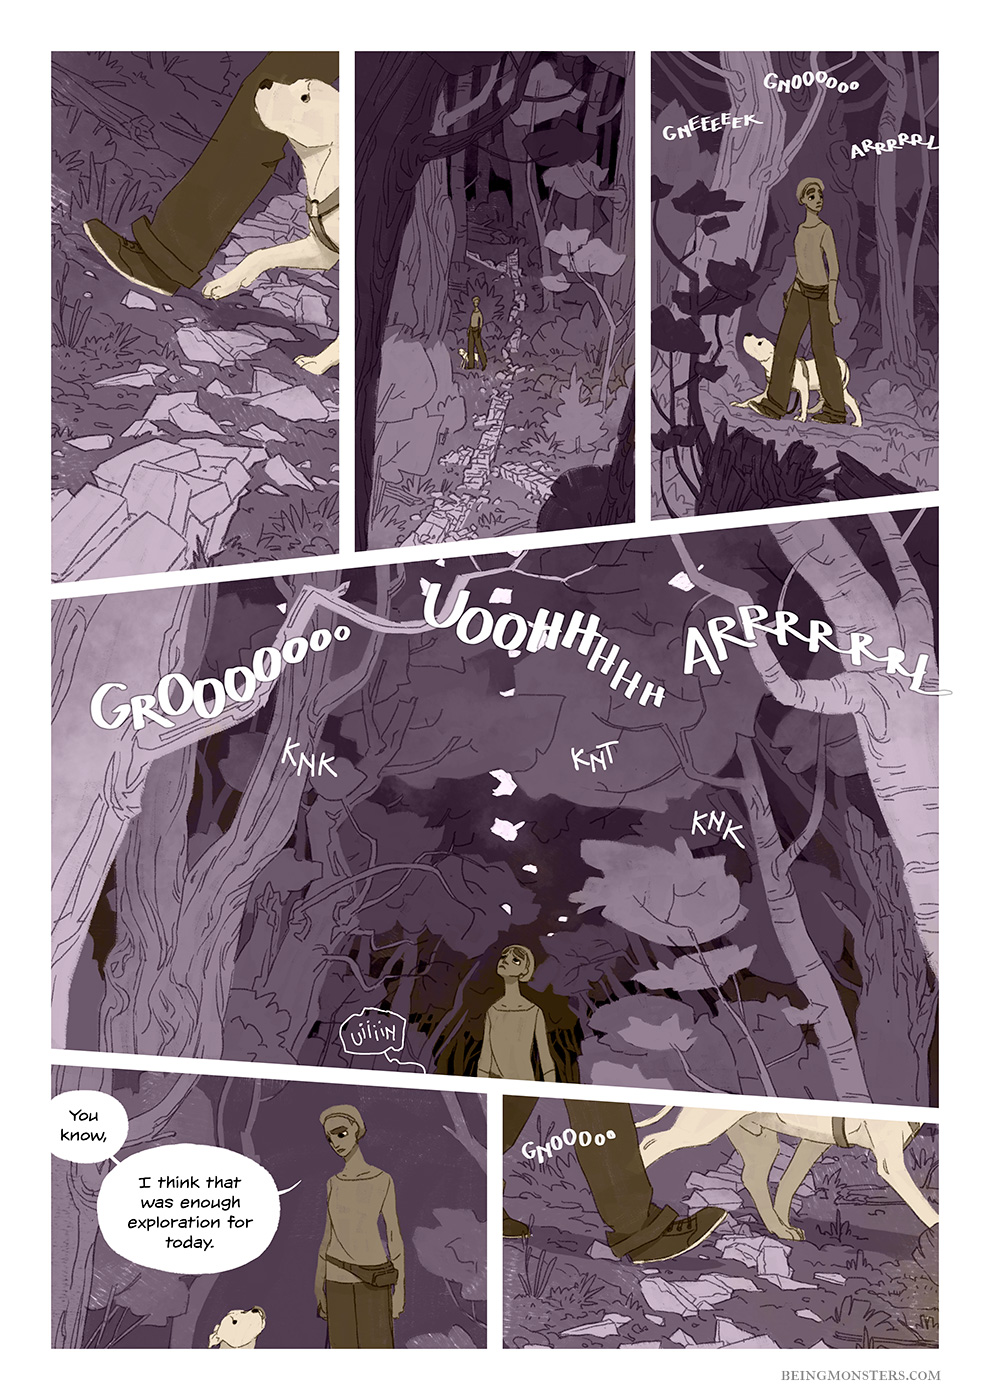 Being Monsters Book 1 Chapter 2 page 18 EN